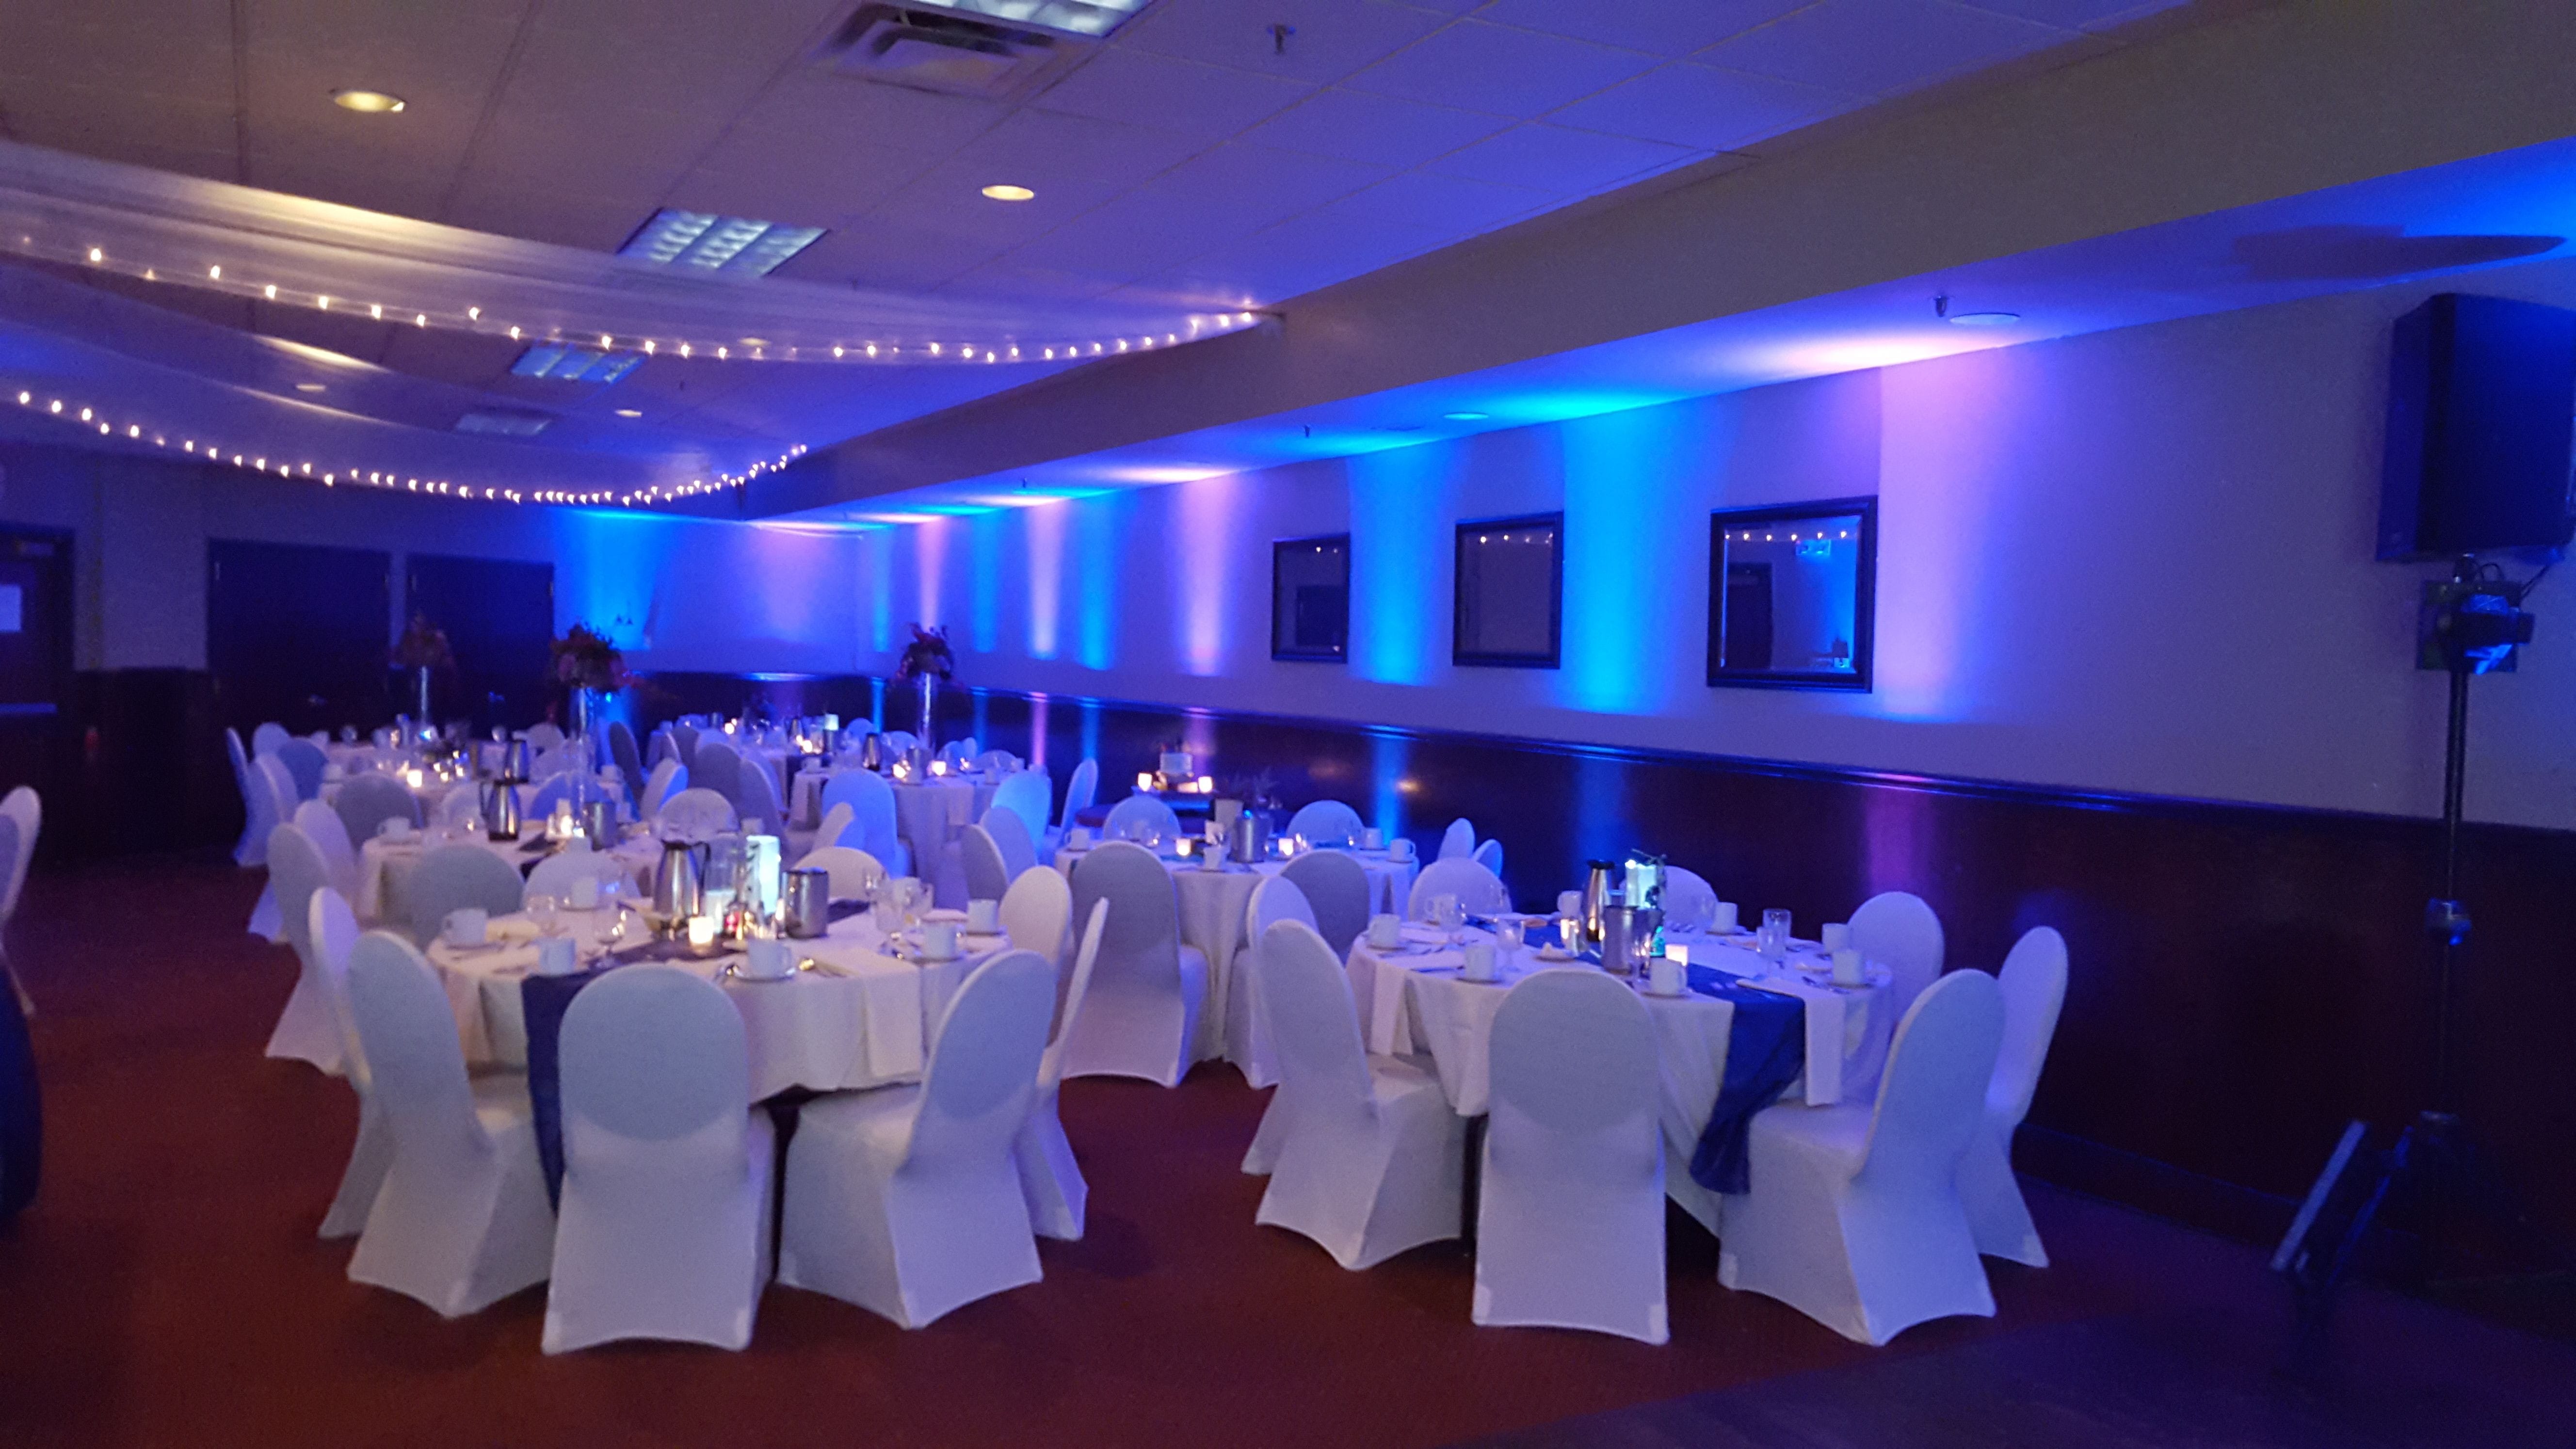 Up lighting in blue and plum purple at Blackwoods Event Center, Proctor.